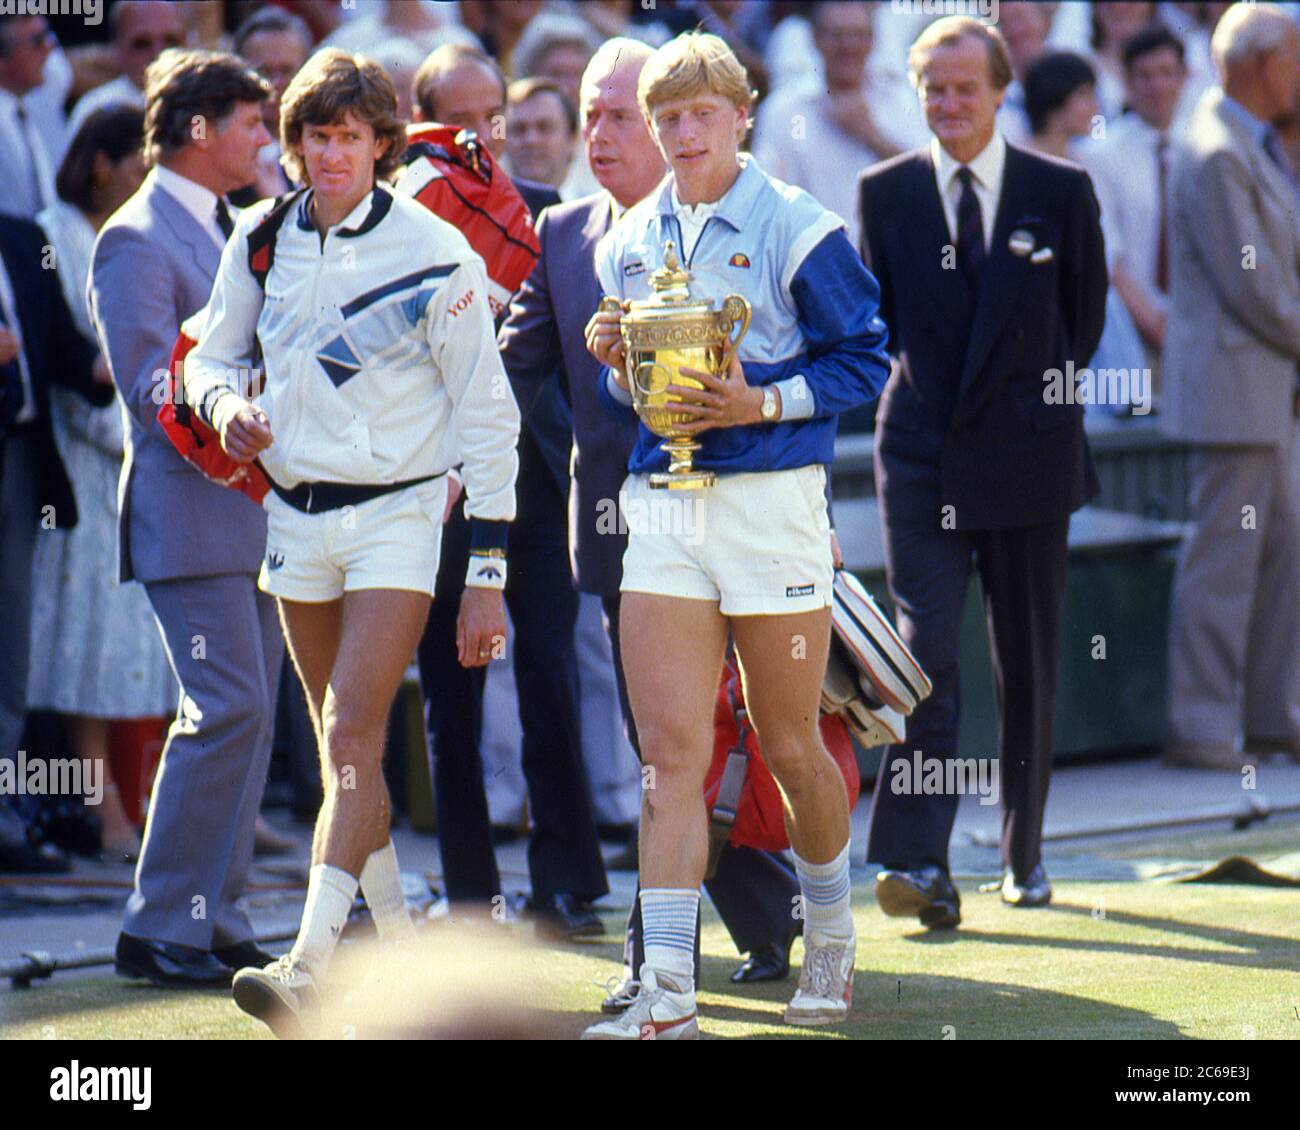 Boris BECKER (GER, FRG, right), with winner's cup in Haenden (Handen),  leaves the center court after his first Wimbledon victory with his final  opponent Kevin CURREN (RSA); Tennis Grand Slam tournament in